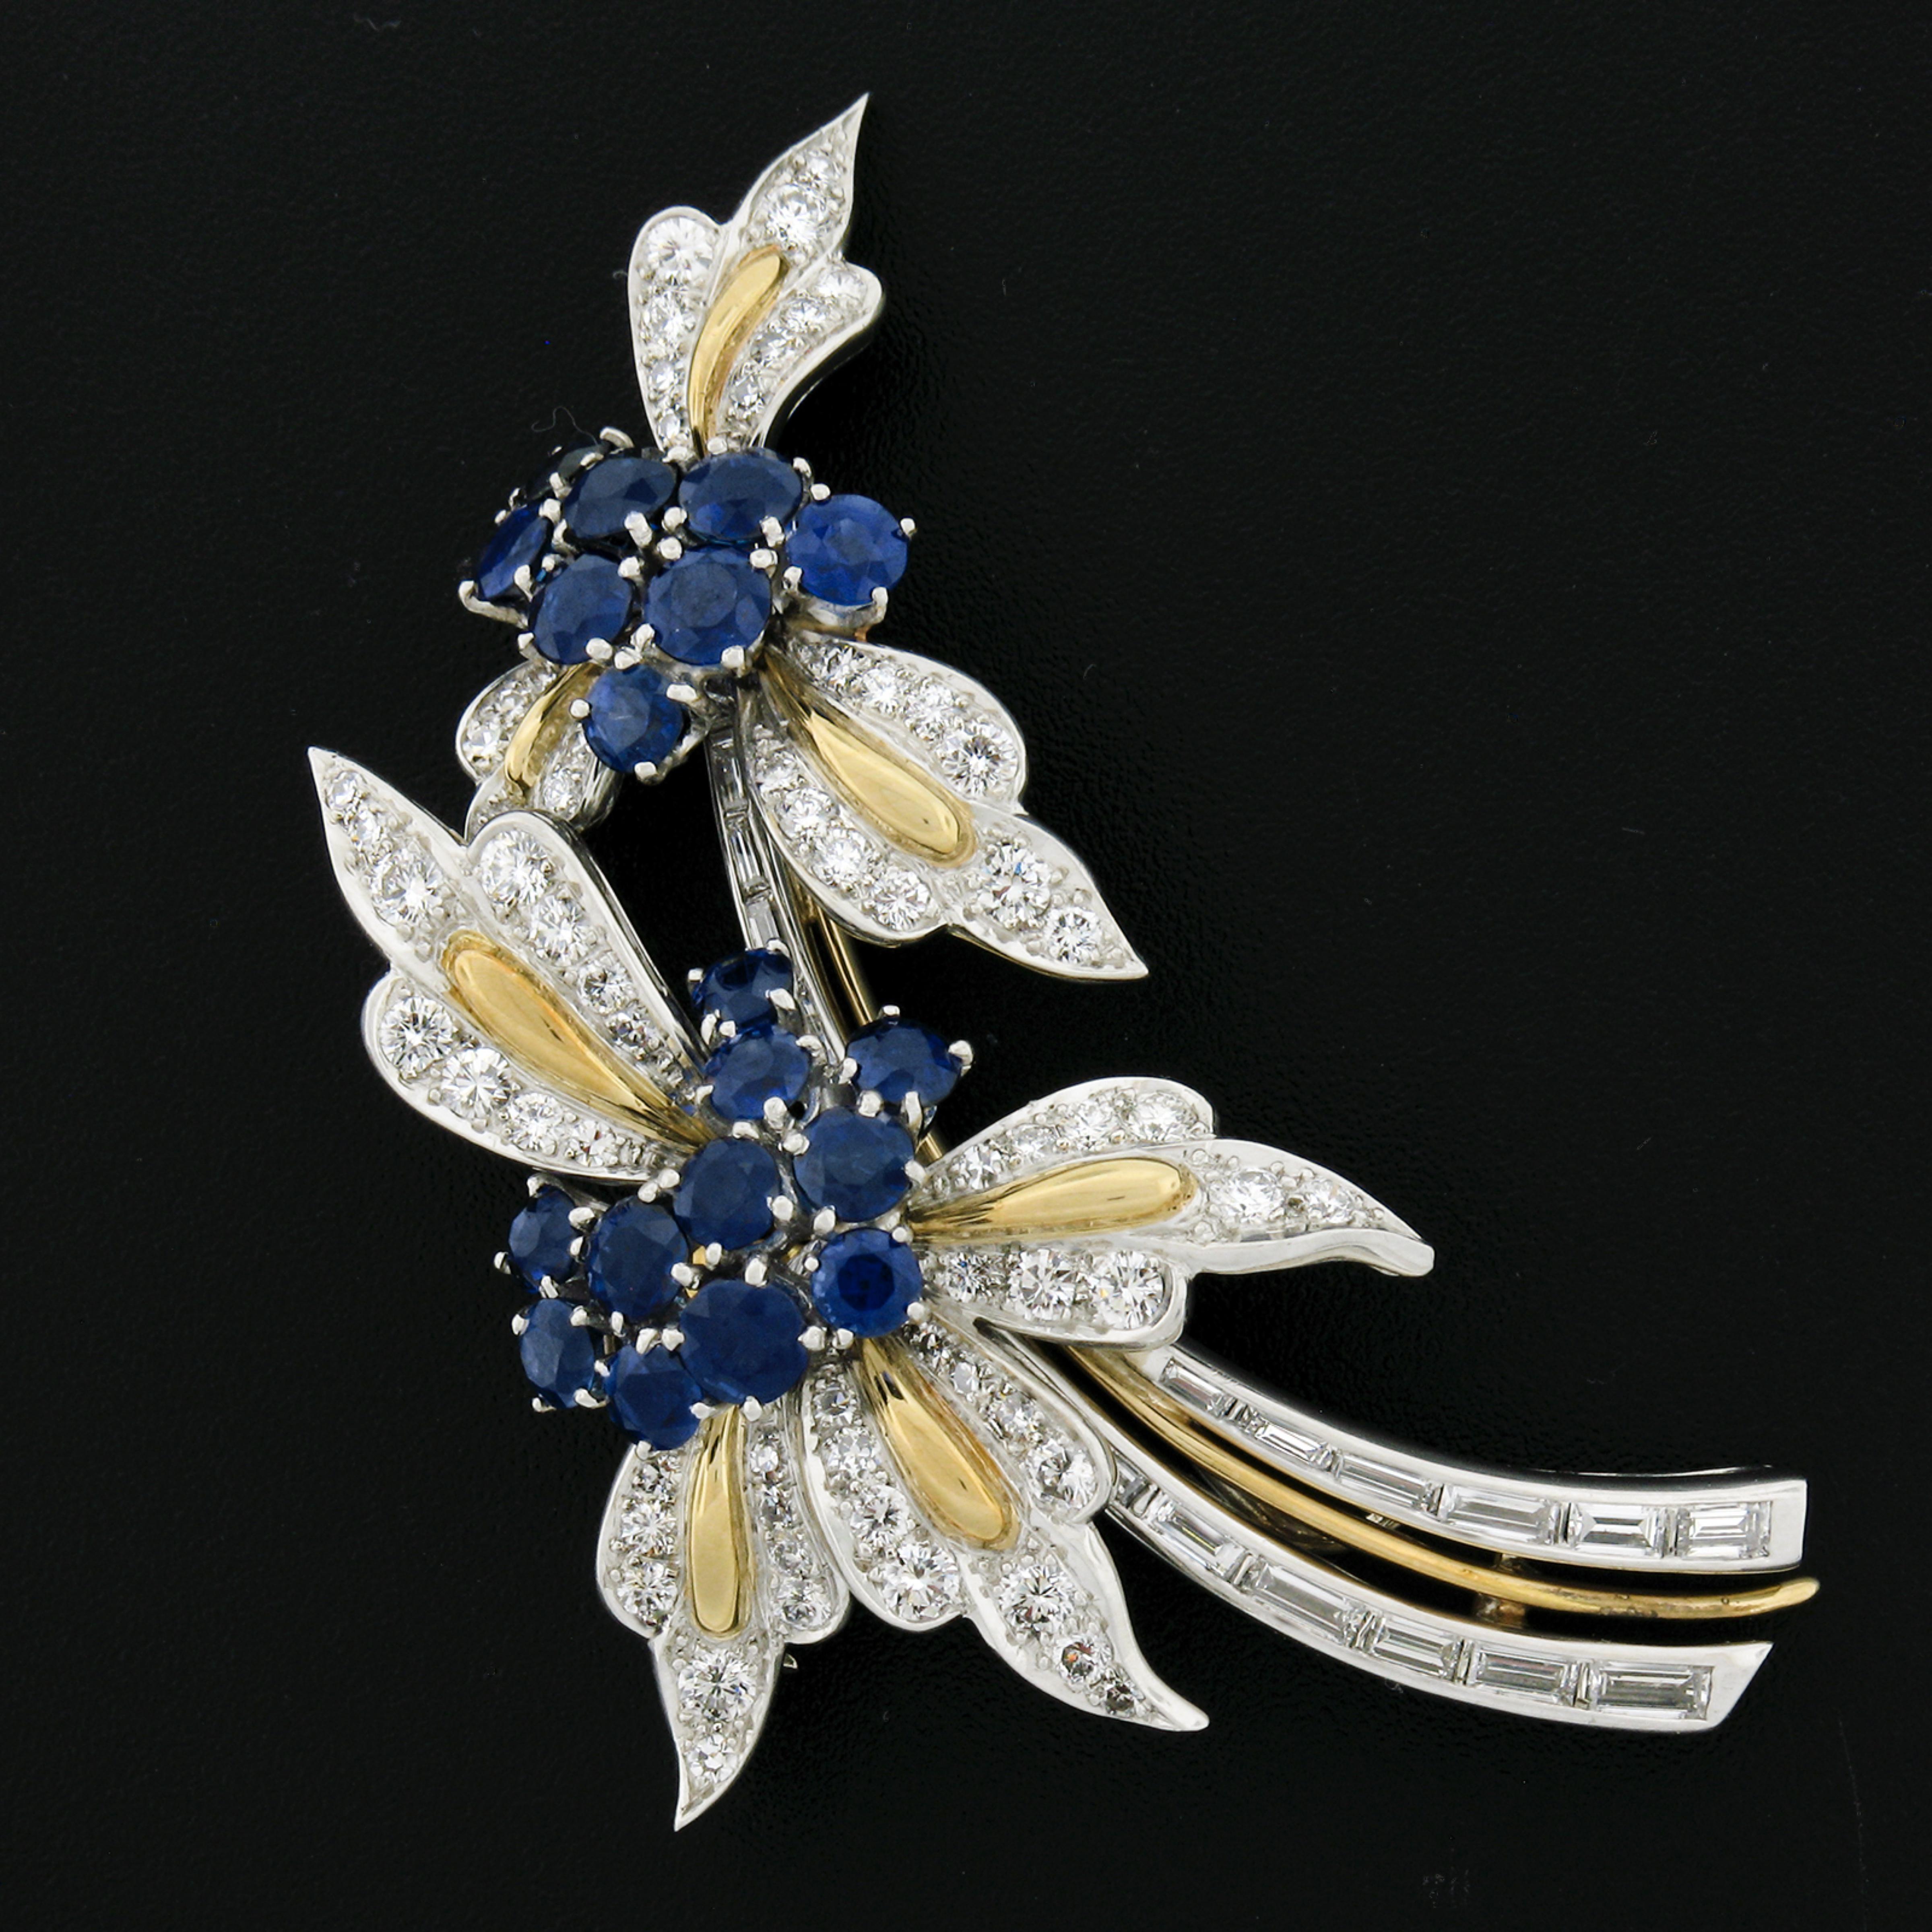 Here we have an absolutely jaw dropping vintage brooch that was very well crafted from solid platinum and 18k yellow gold. This fancy brooch features a beautiful dual flower and branch design that is completely drenched with TOP QUALITY sapphires